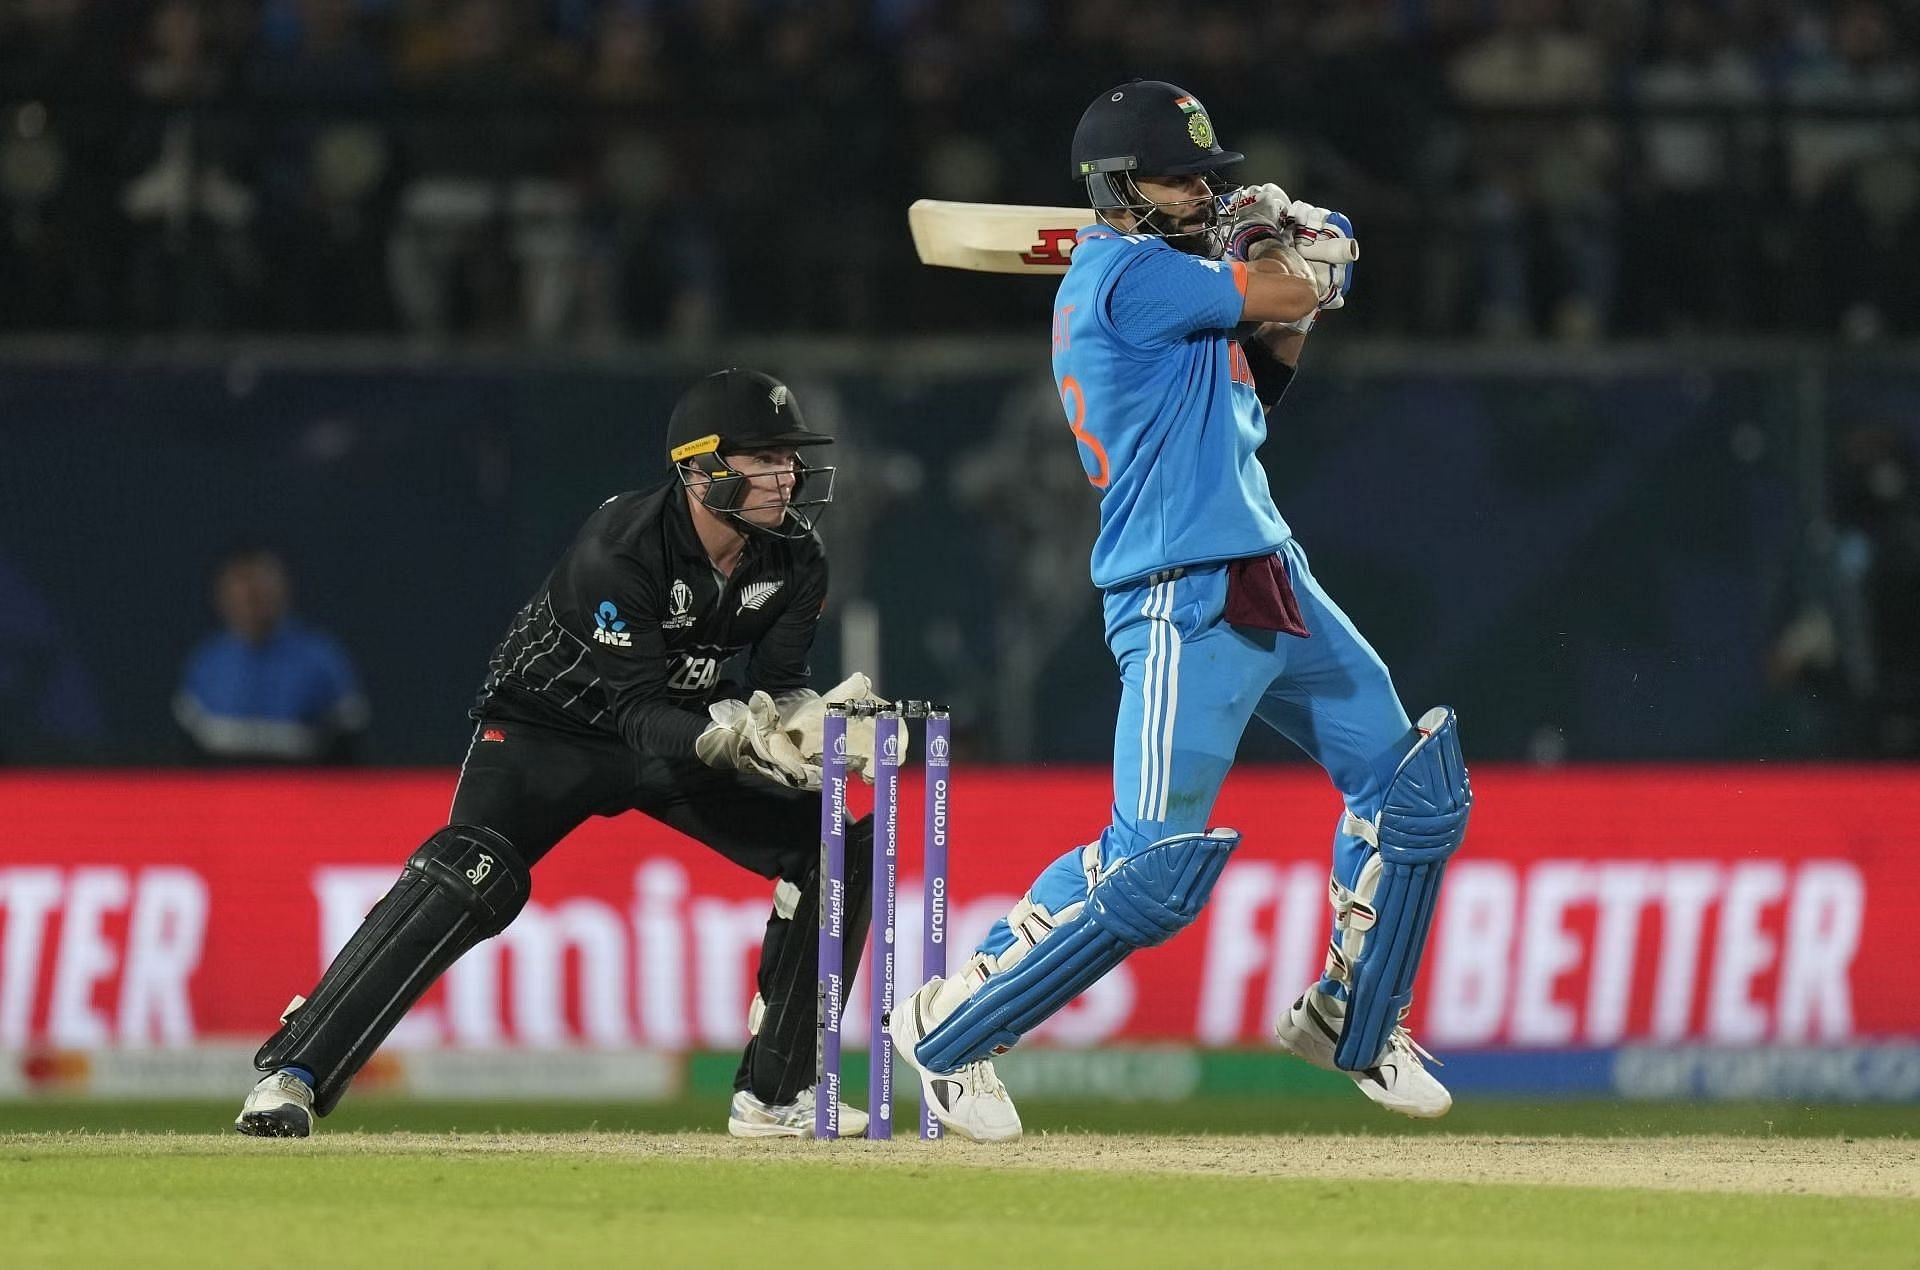 India chased down a 274-run target in their league game against New Zealand. [P/C: AP]